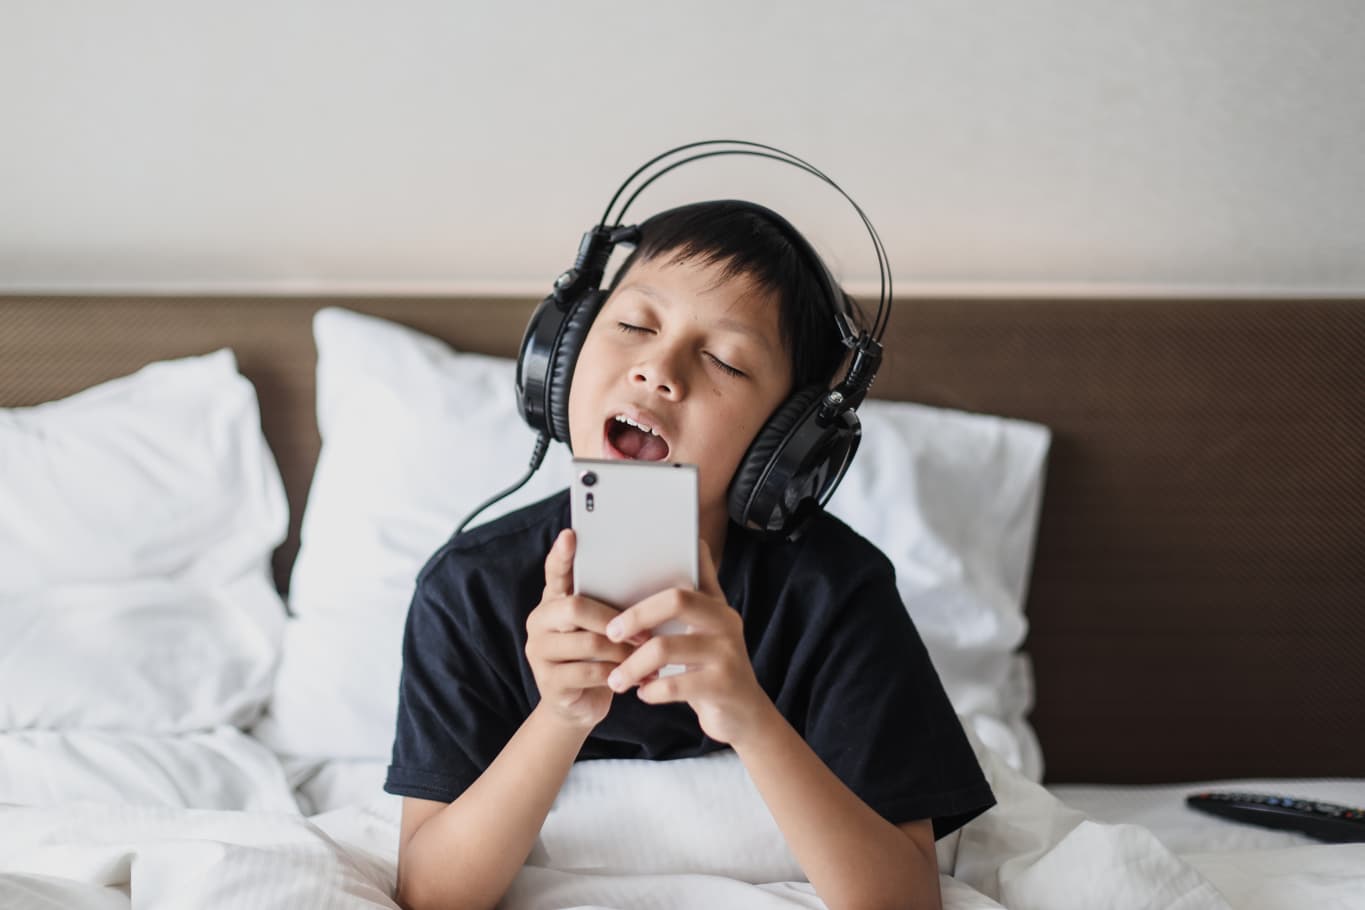 A child listening to music and singing